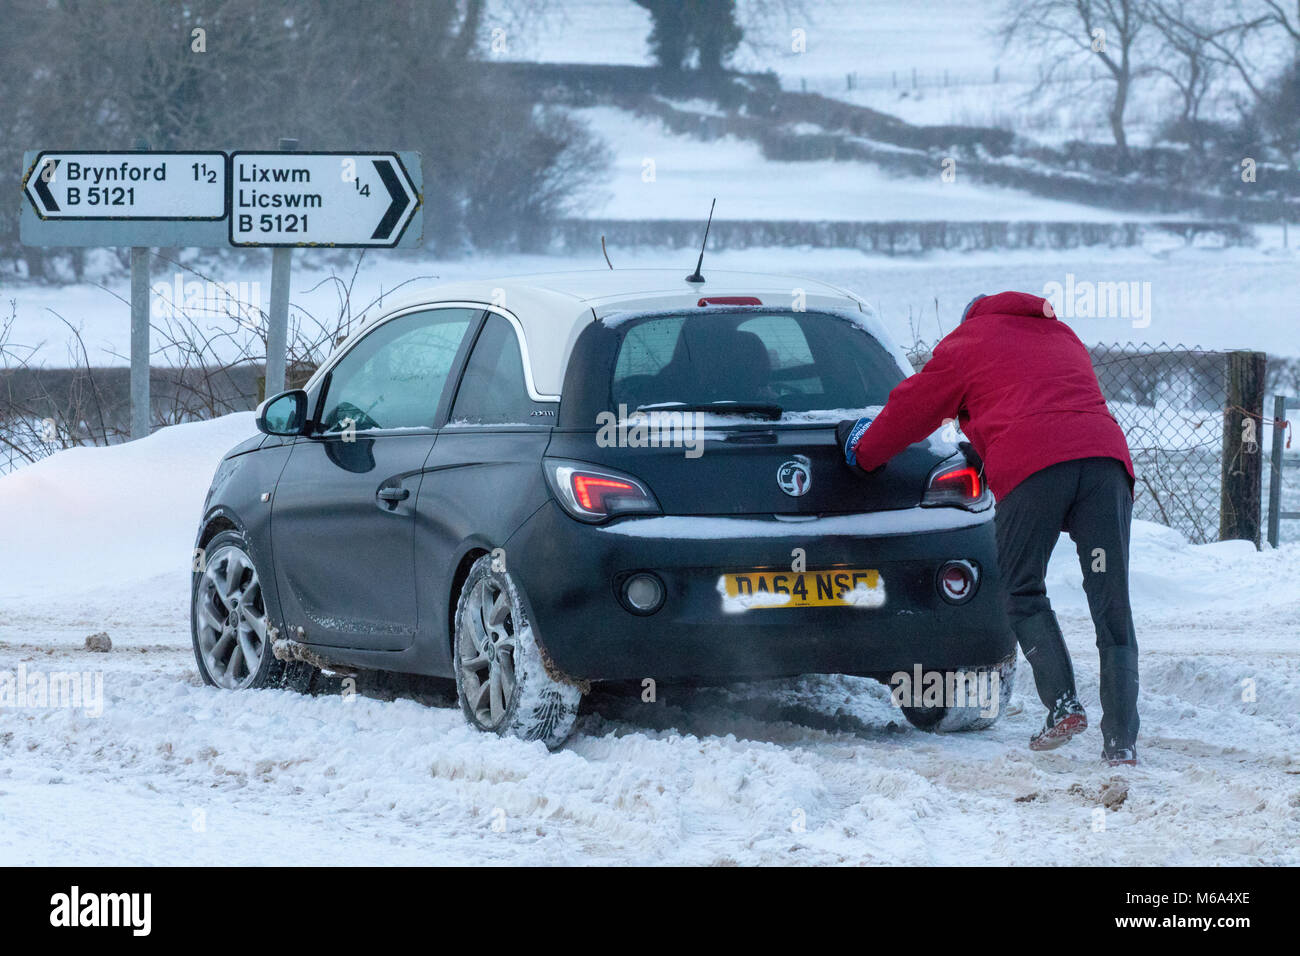 Lixwm, Flintshire, Wales, UK 2nd March 2018, UK Weather:  Storm Emma bringing stormy blizzard conditions in the uplands Flintshire with Met Office Warnings in place. Many rural areas cut off with snow ploughs and tractors attempting to clear main roads only with more snow forecasted from midday. A passer by assisting a driver to gain traction on a rural road in the vilage of Lixwm, Flintshire, Wales  © DGDImages/Alamy Live News Stock Photo